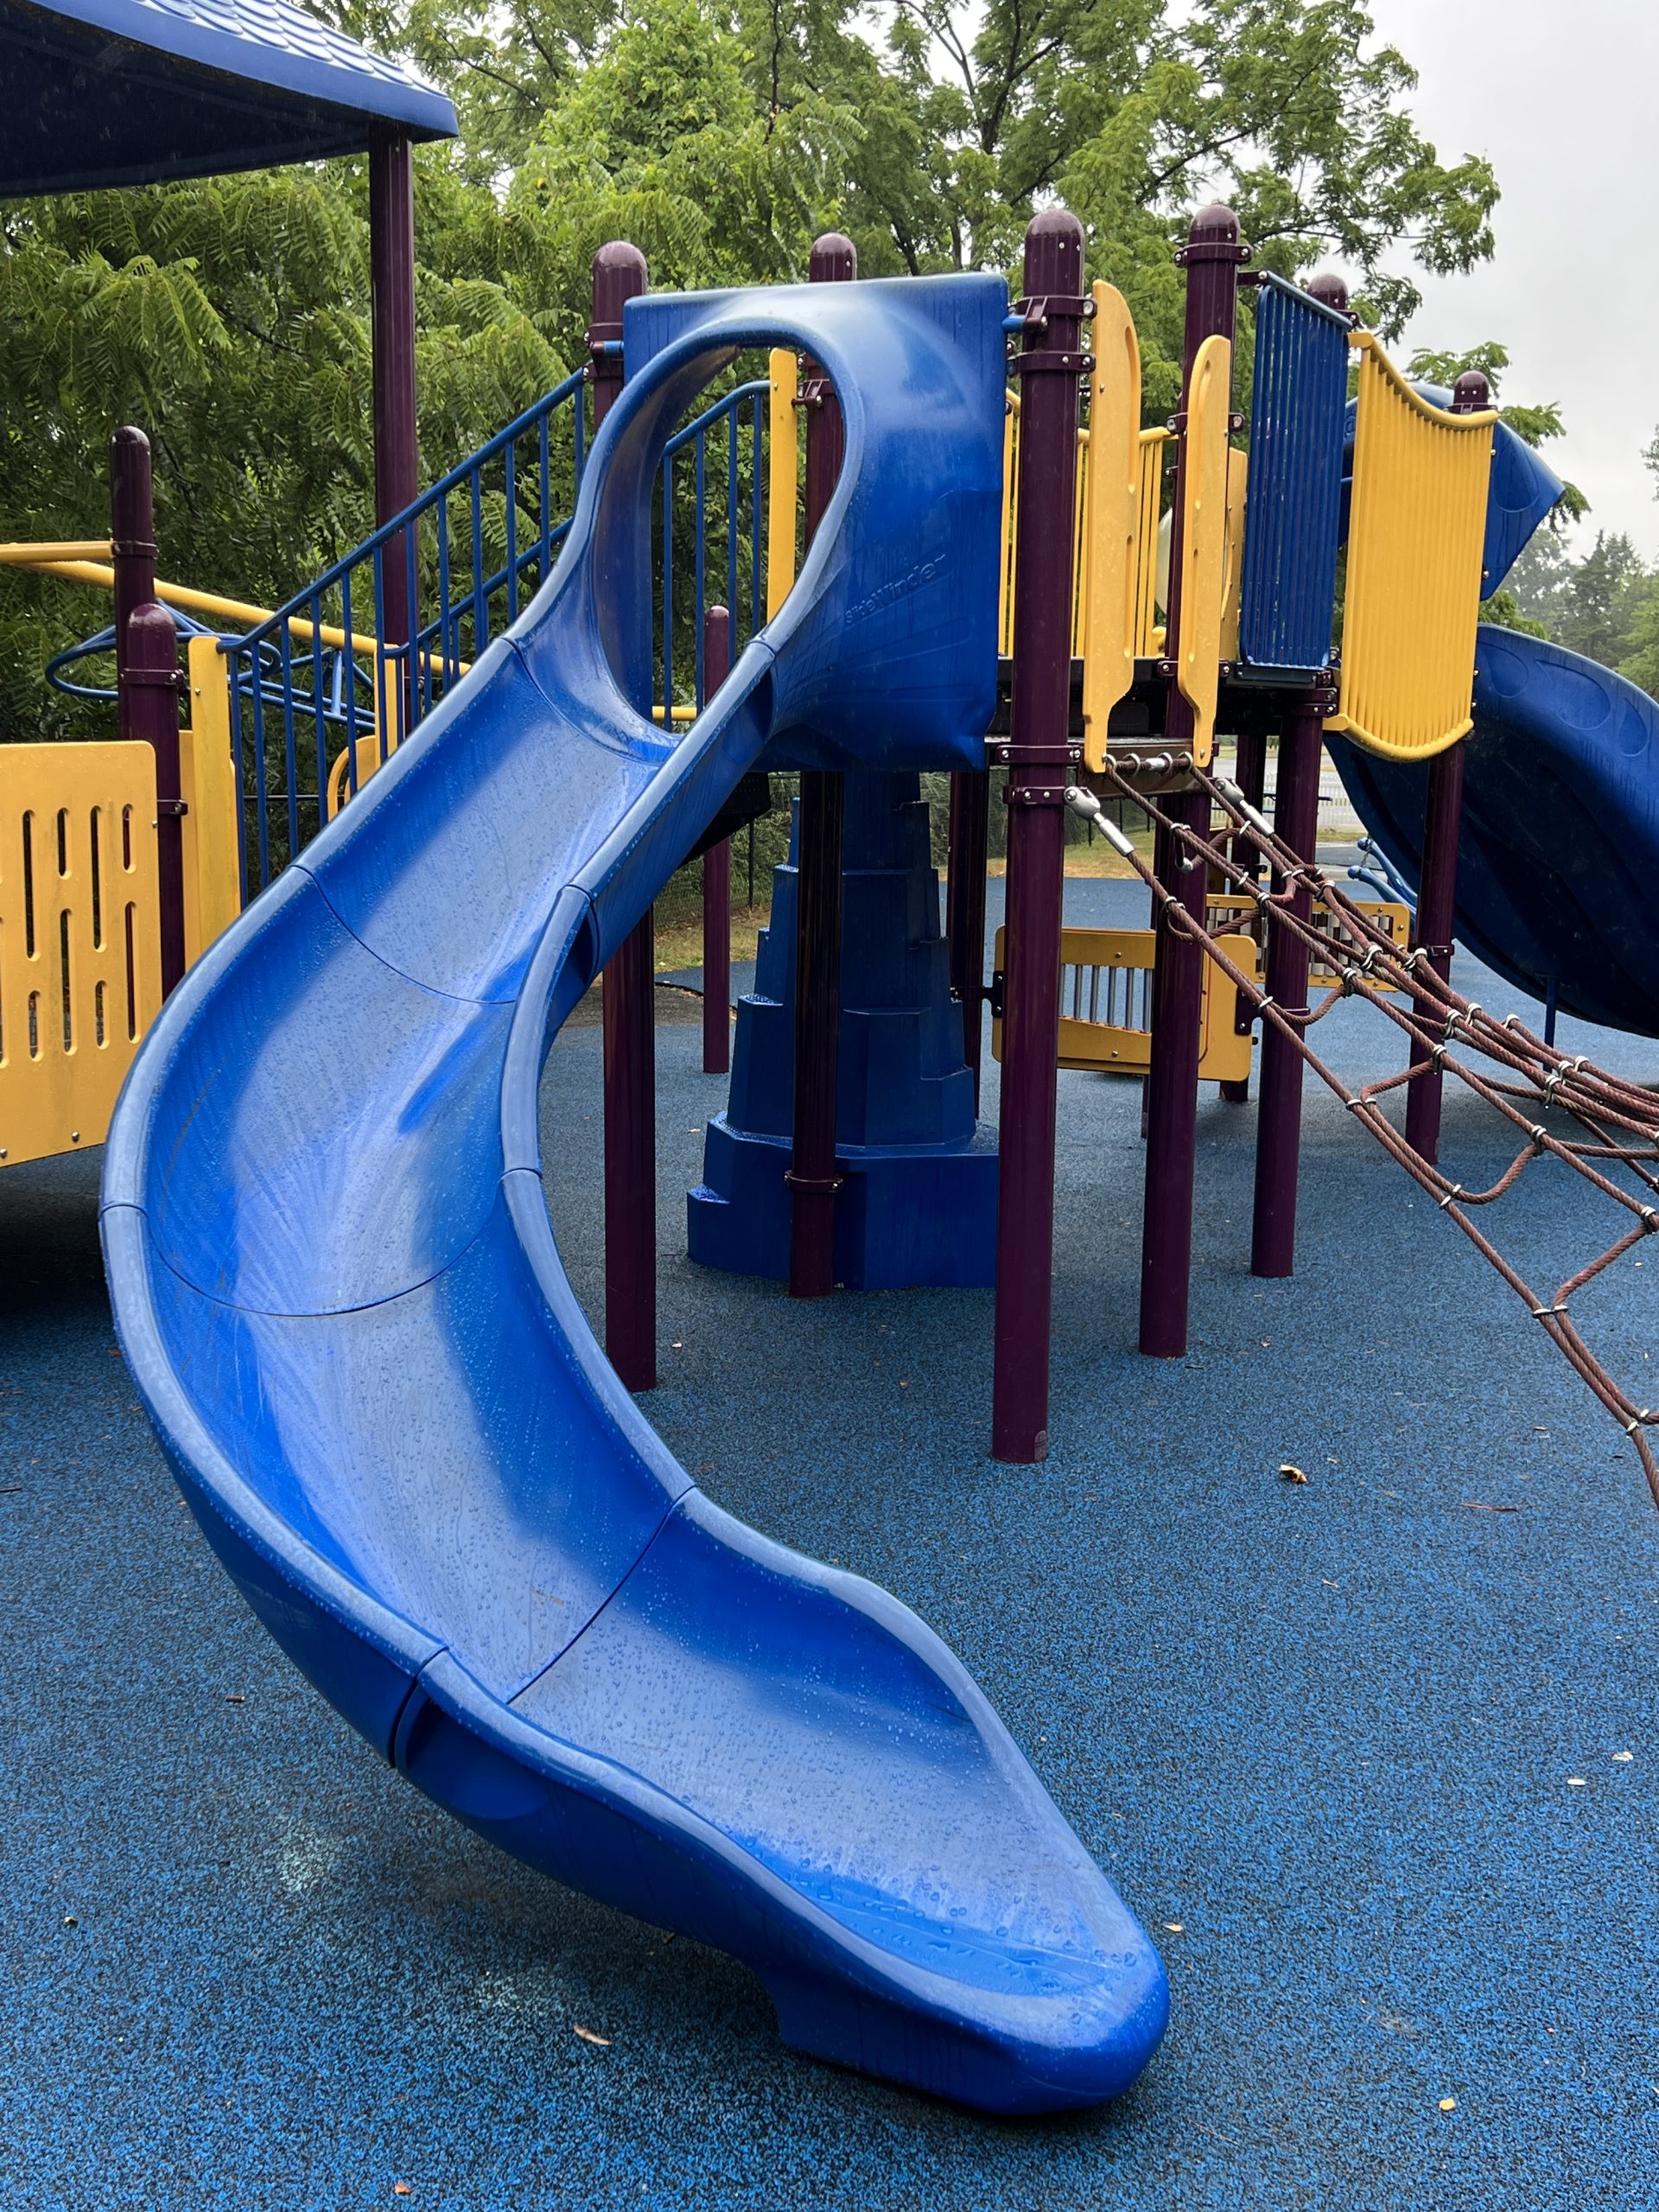 George M. Conway Park Playground in West Long Branch NJ - Larger Playground Feature - SLIDE blue curvy slide